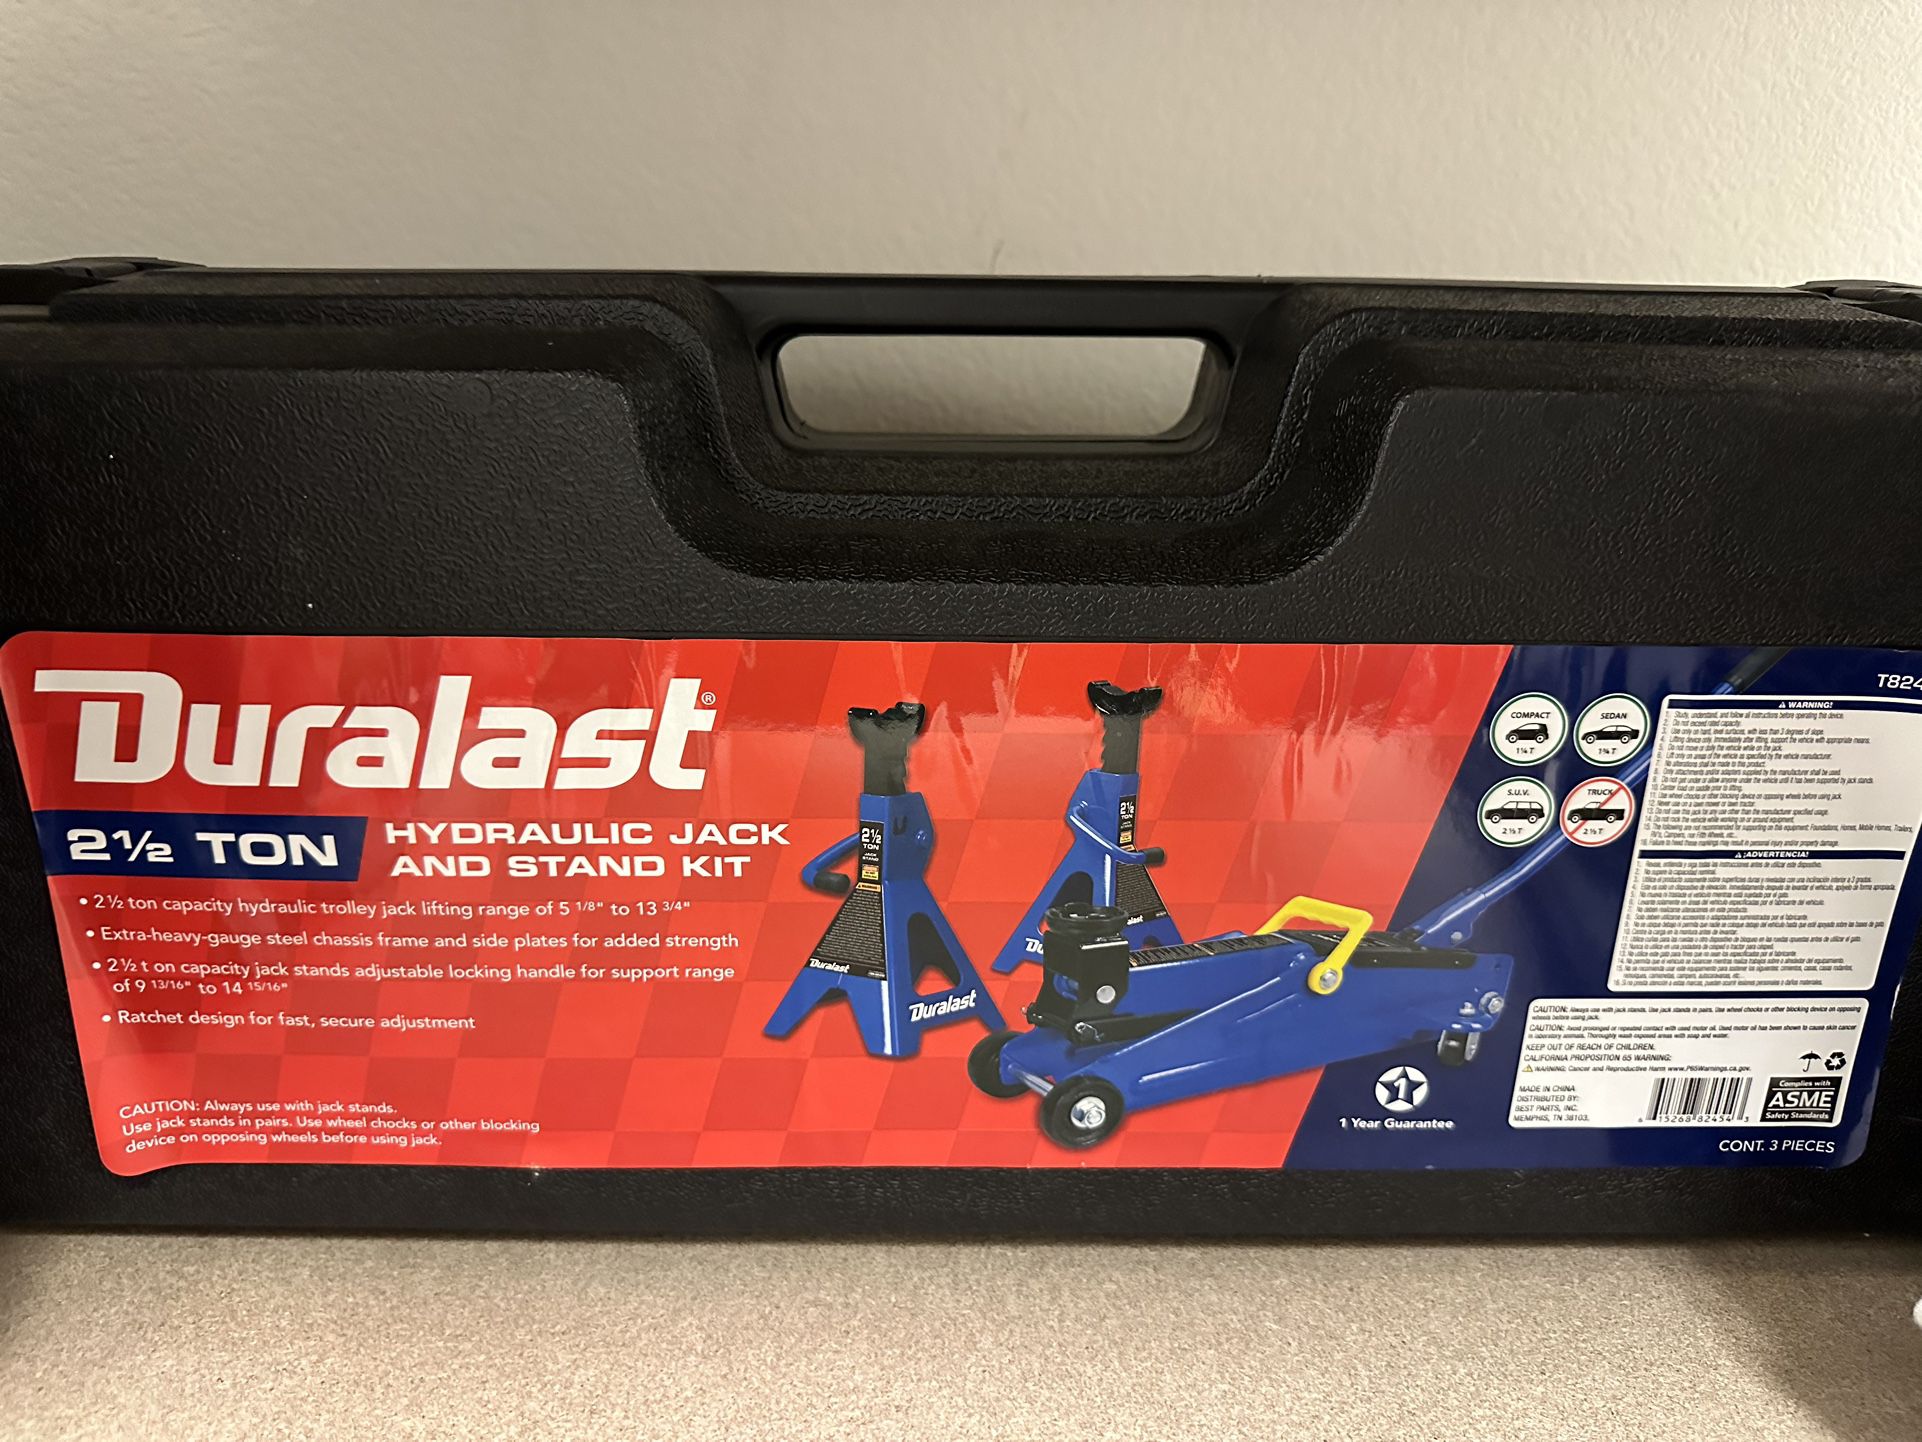 Duralast 2 1/2 Ton Hydraulic Jack And Stand Kit